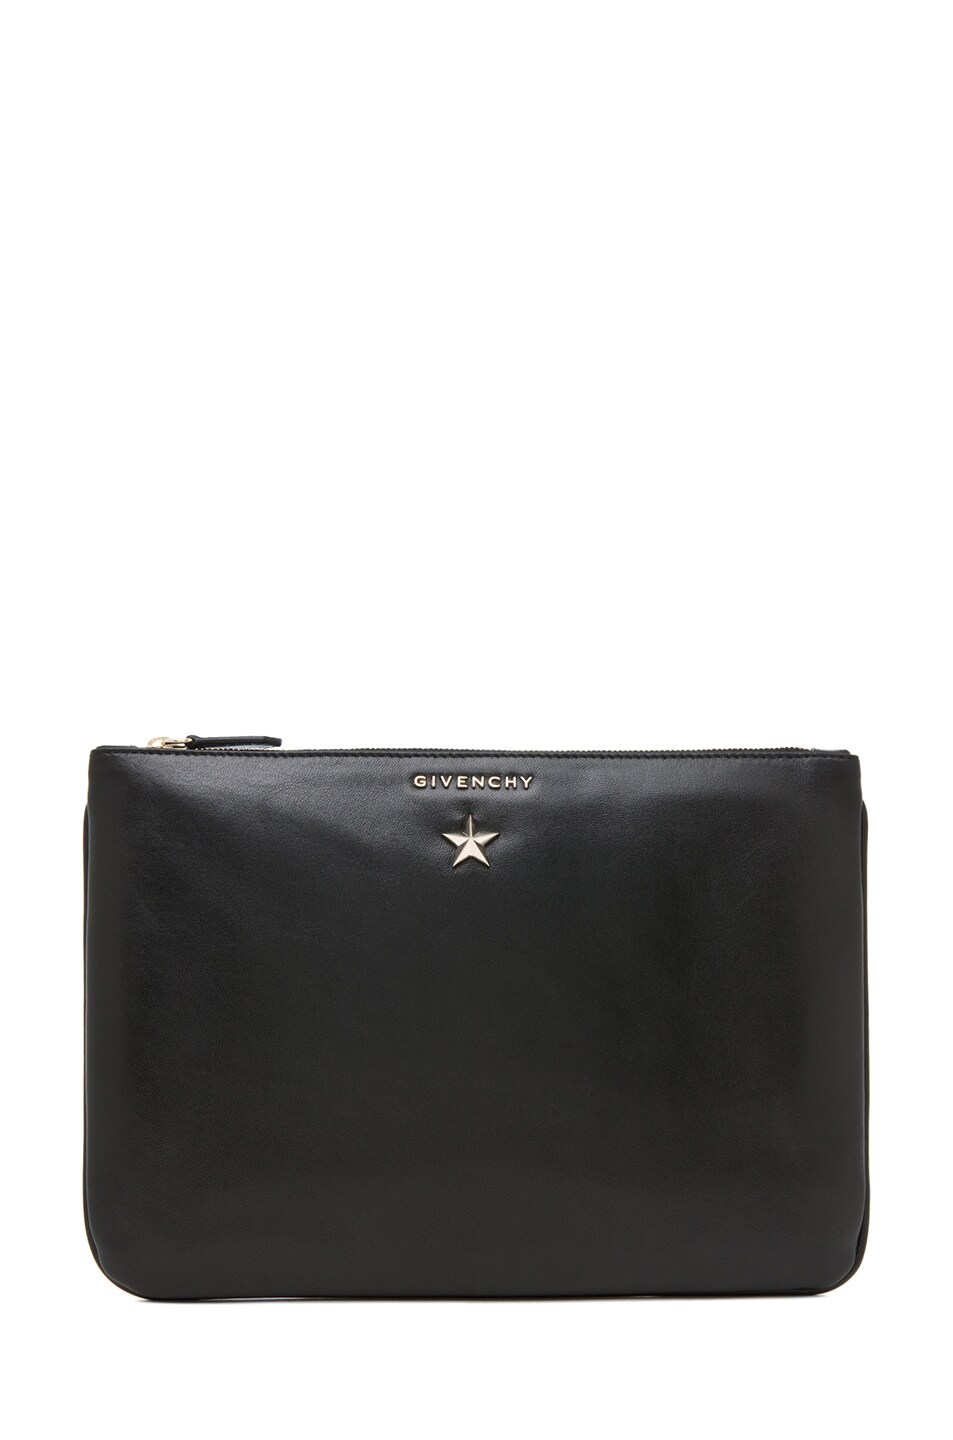 Image 1 of Givenchy Medium Star Pouch in Black